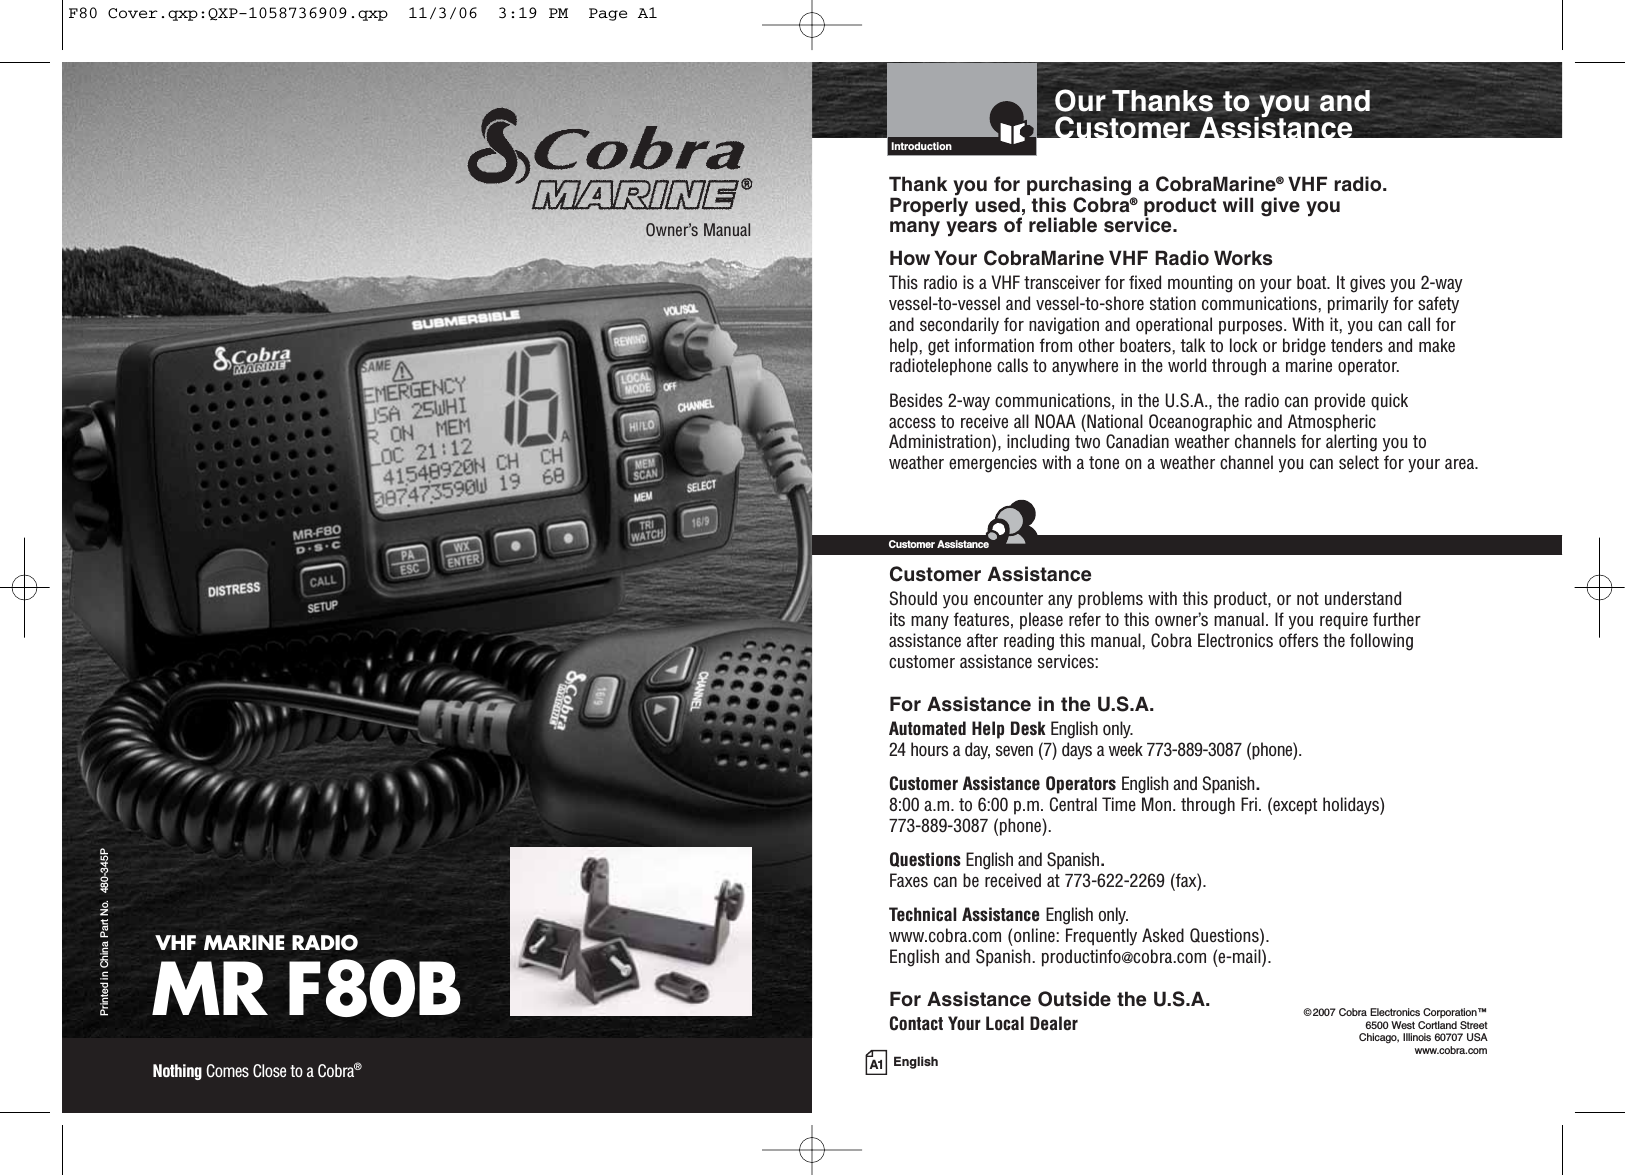 A1 EnglishOur Thanks to you andCustomer AssistanceIntroductionVHF MARINE RADIOMR F80BPrinted in China Part No.  480-345POwner’s ManualNothing Comes Close to a Cobra®Thank you for purchasing a CobraMarine®VHF radio. Properly used, this Cobra®product will give you many years of reliable service.How Your CobraMarine VHF Radio WorksThis radio is a VHF transceiver for fixed mounting on your boat. It gives you 2-wayvessel-to-vessel and vessel-to-shore station communications, primarily for safetyand secondarily for navigation and operational purposes. With it, you can call forhelp, get information from other boaters, talk to lock or bridge tenders and makeradiotelephone calls to anywhere in the world through a marine operator.Besides 2-way communications, in the U.S.A., the radio can provide quick access to receive all NOAA (National Oceanographic and AtmosphericAdministration), including two Canadian weather channels for alerting you toweather emergencies with a tone on a weather channel you can select for your area.Customer AssistanceShould you encounter any problems with this product, or not understand its many features, please refer to this owner’s manual. If you require furtherassistance after reading this manual, Cobra Electronics offers the following customer assistance services:For Assistance in the U.S.A. Automated Help Desk English only.24 hours a day, seven (7) days a week 773-889-3087 (phone).Customer Assistance Operators English and Spanish.8:00 a.m. to 6:00 p.m. Central Time Mon. through Fri. (except holidays) 773-889-3087 (phone).Questions English and Spanish.Faxes can be received at 773-622-2269 (fax).Technical Assistance English only.www.cobra.com (online: Frequently Asked Questions).English and Spanish. productinfo@cobra.com (e-mail).For Assistance Outside the U.S.A.Contact Your Local DealerCustomer Assistance©2007 Cobra Electronics Corporation™6500 West Cortland StreetChicago, Illinois 60707 USAwww.cobra.comF80 Cover.qxp:QXP-1058736909.qxp  11/3/06  3:19 PM  Page A1